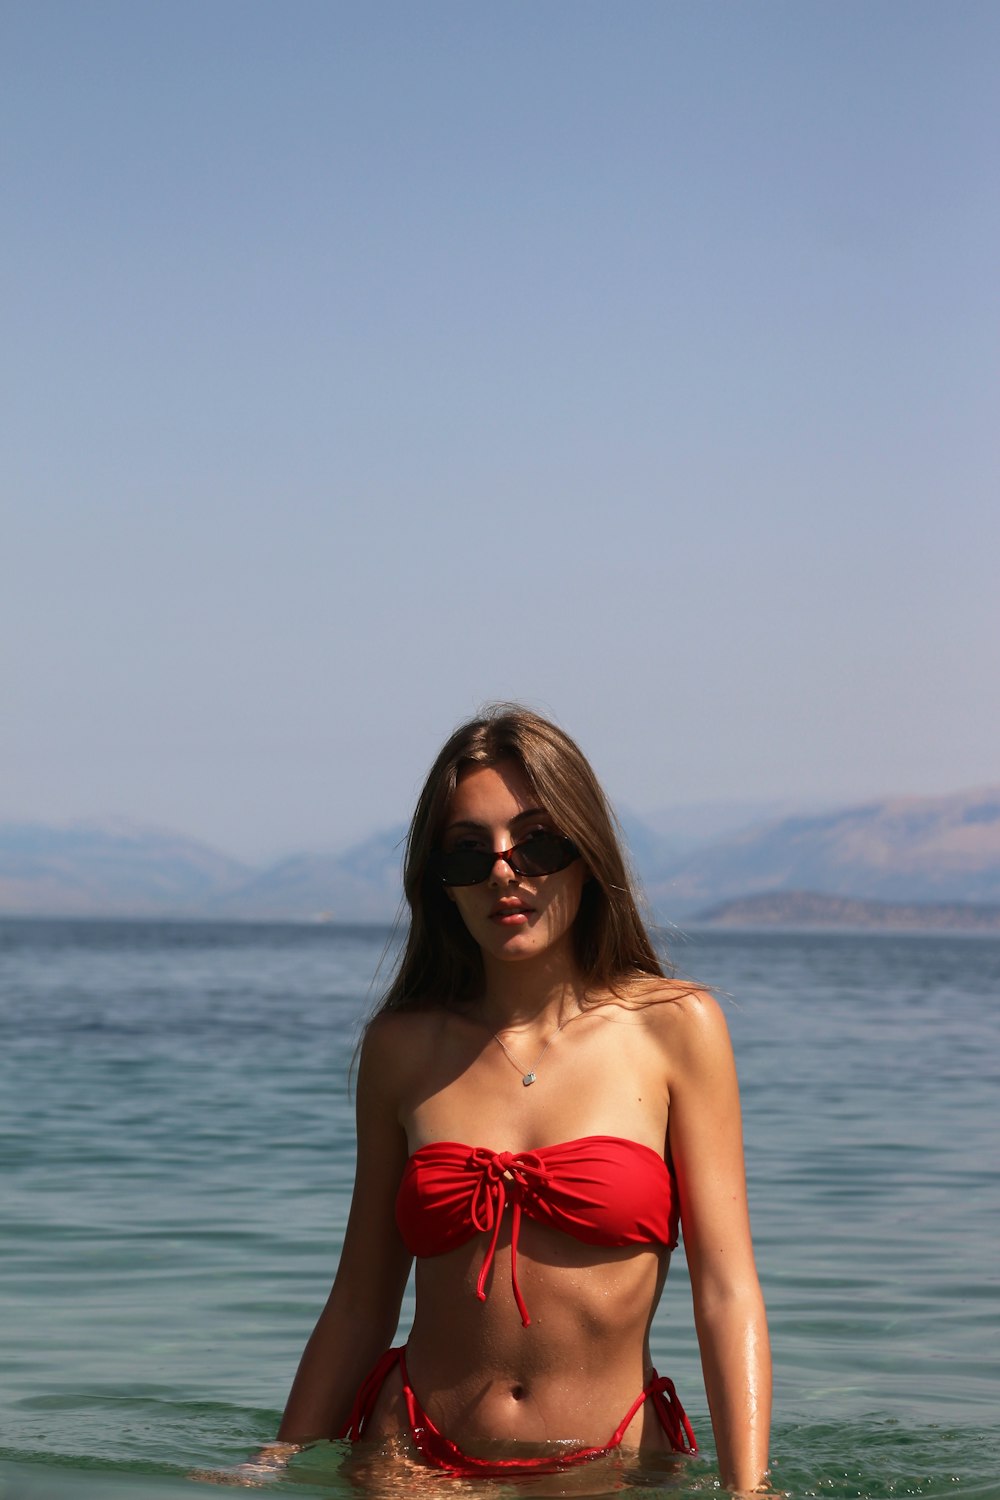 woman in red tube dress wearing black sunglasses standing on sea shore during daytime